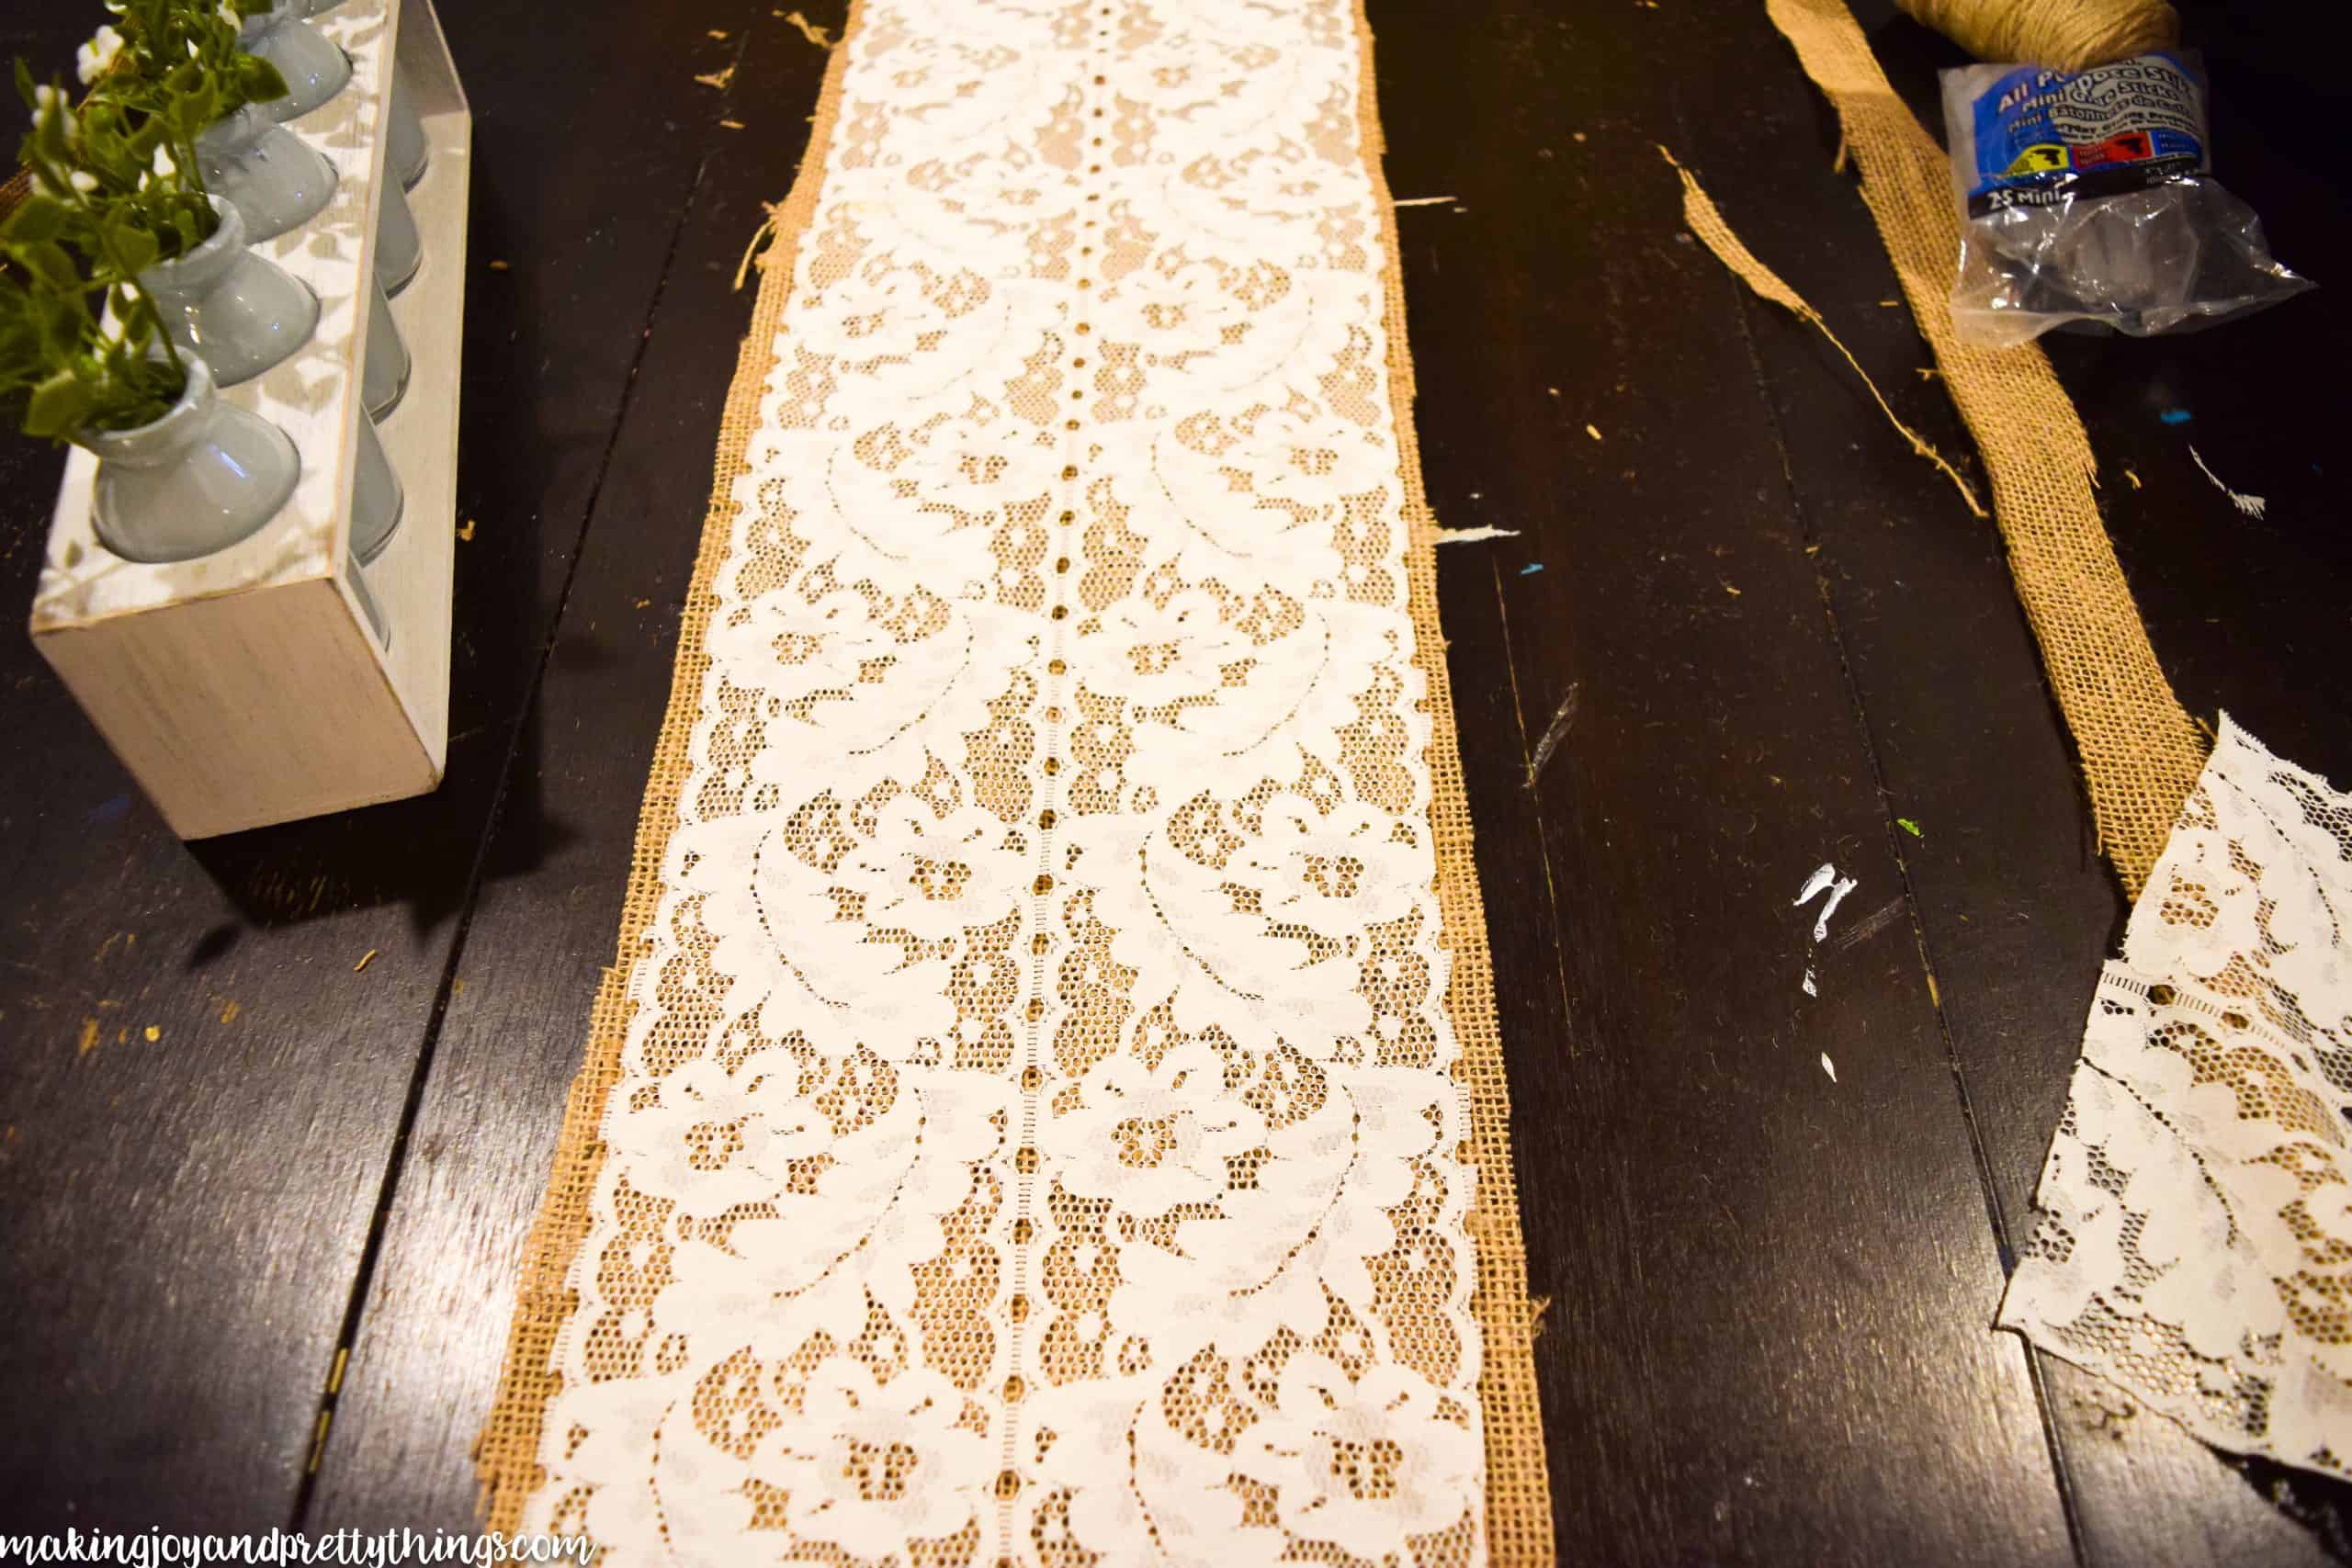 A strip of white lace fabric sits on top of a strip of burlap fabric to create a farmhouse style table runner across a dark wood table.  Scraps of cut fabric surround the runner.